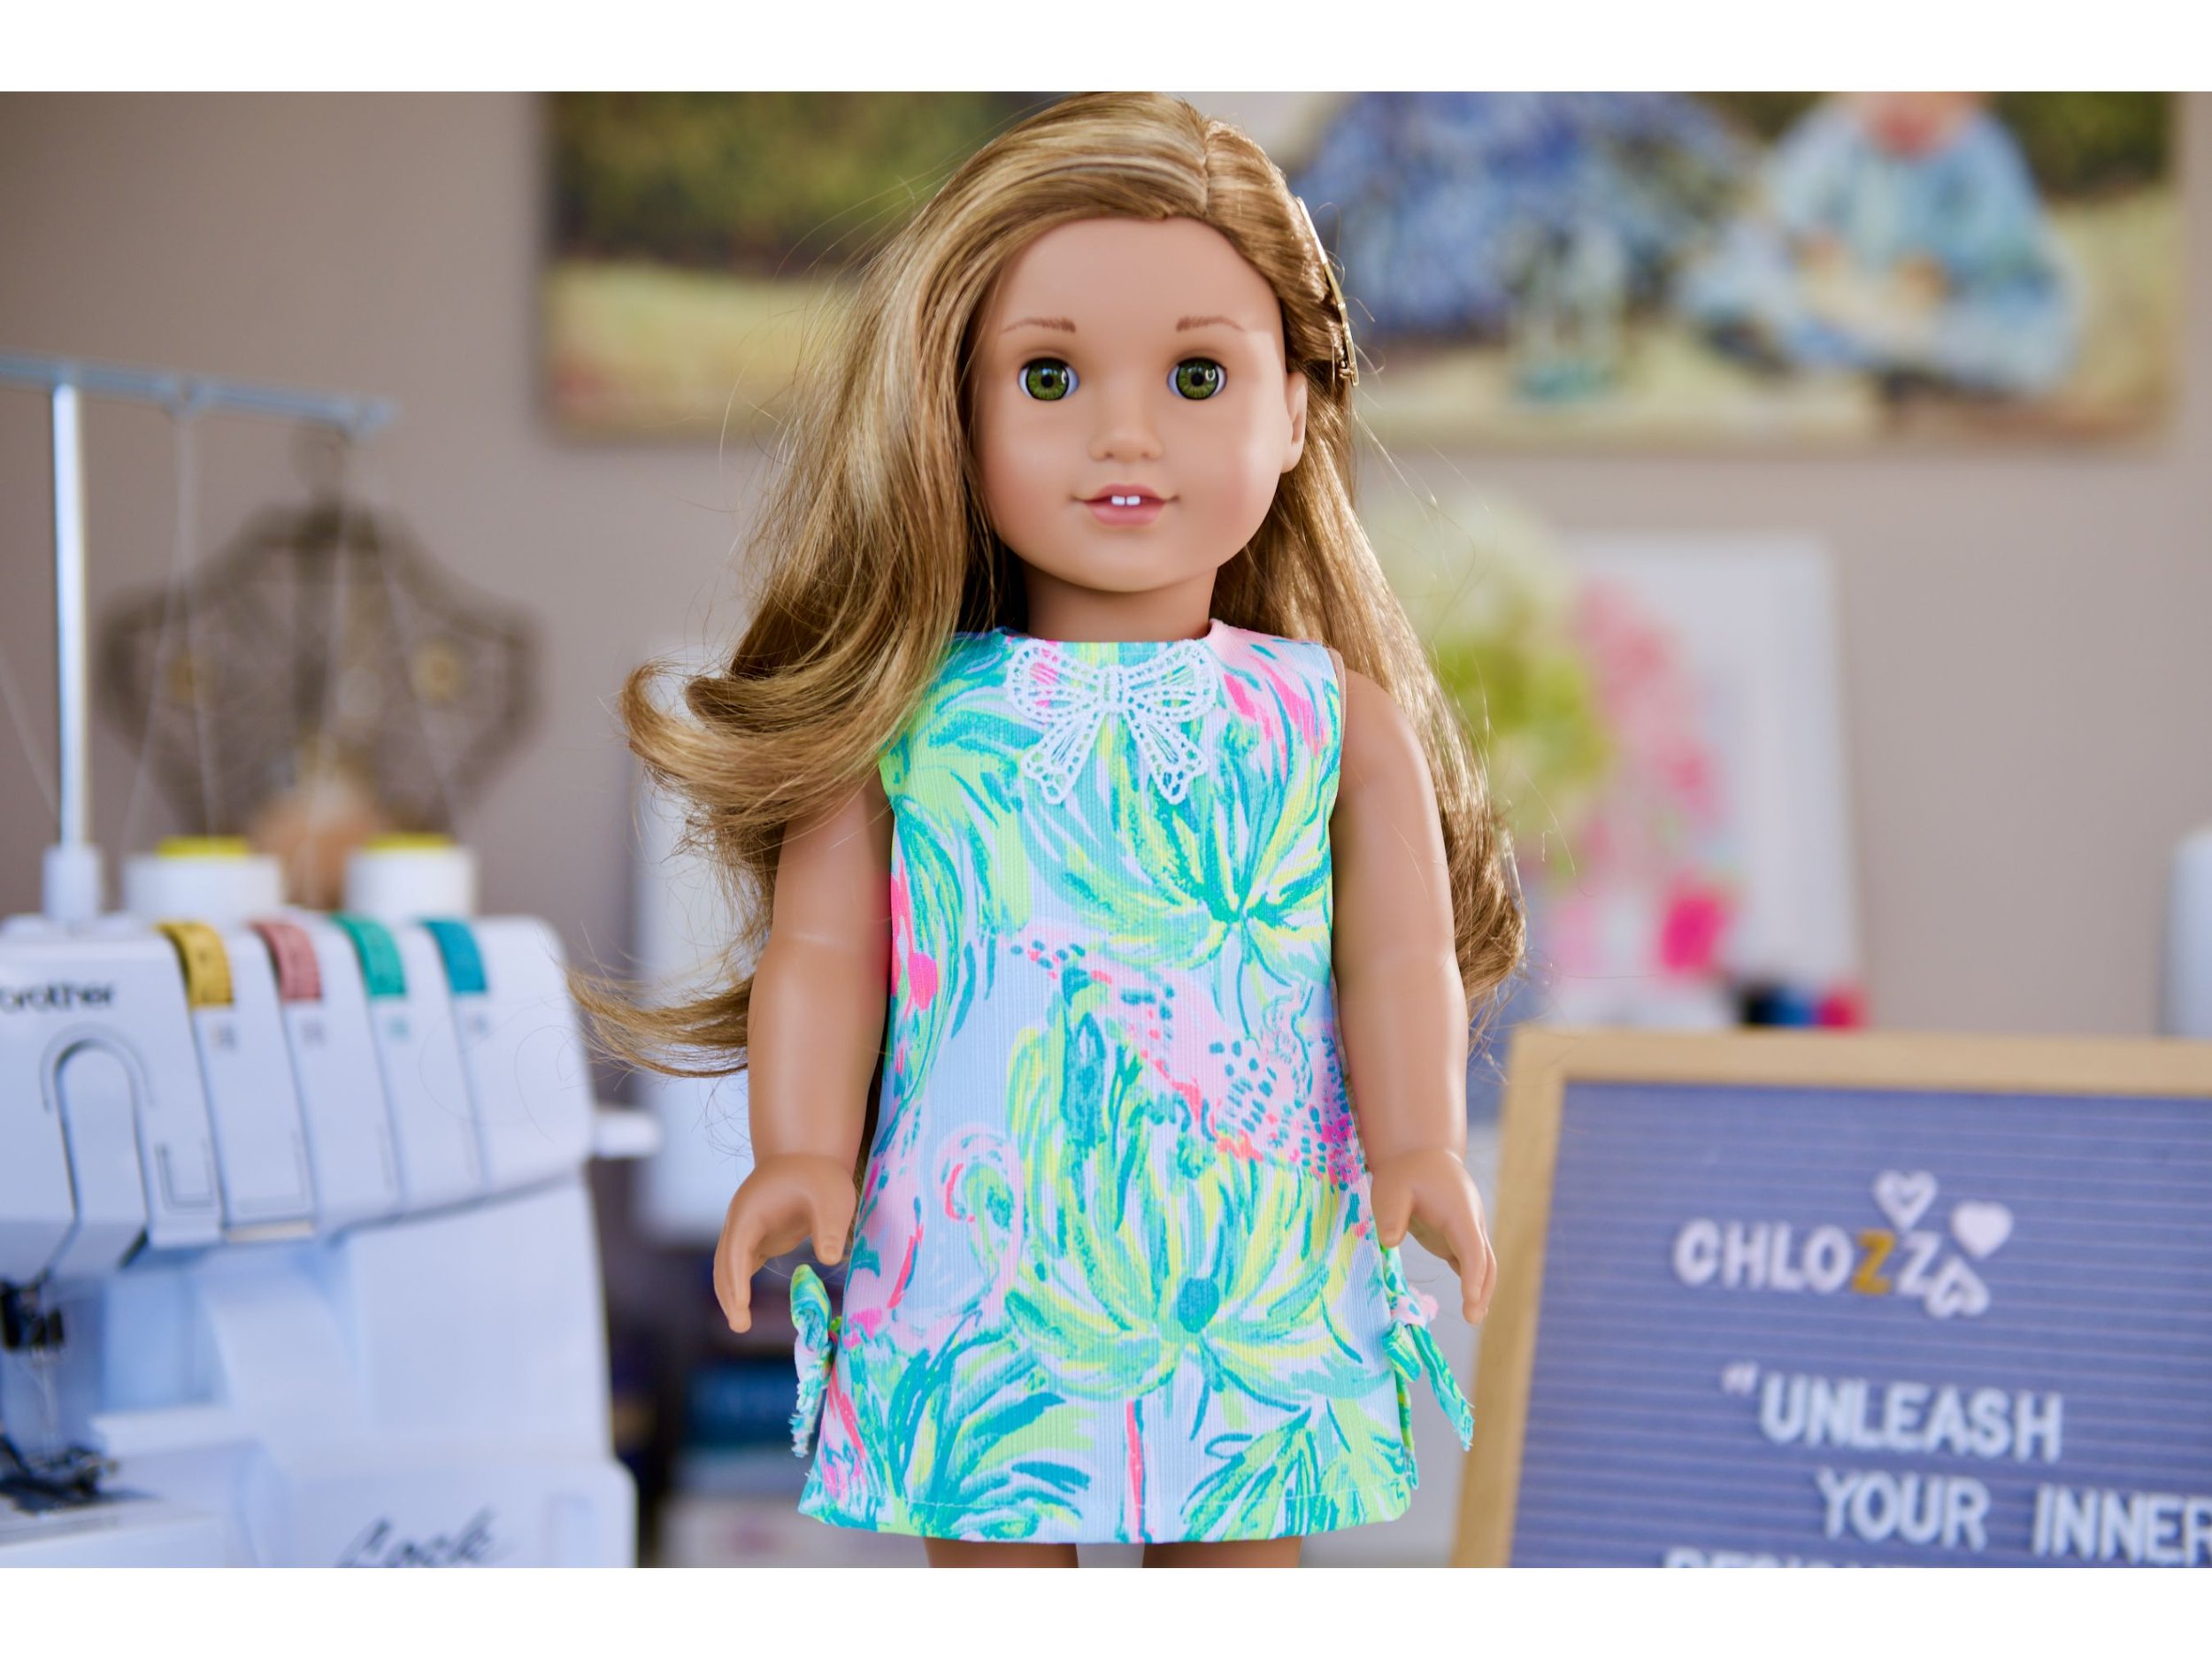 Home Crafted Shift Dress For 18 American Girl AG Dolls In Lilly Pulitzer Fabric 